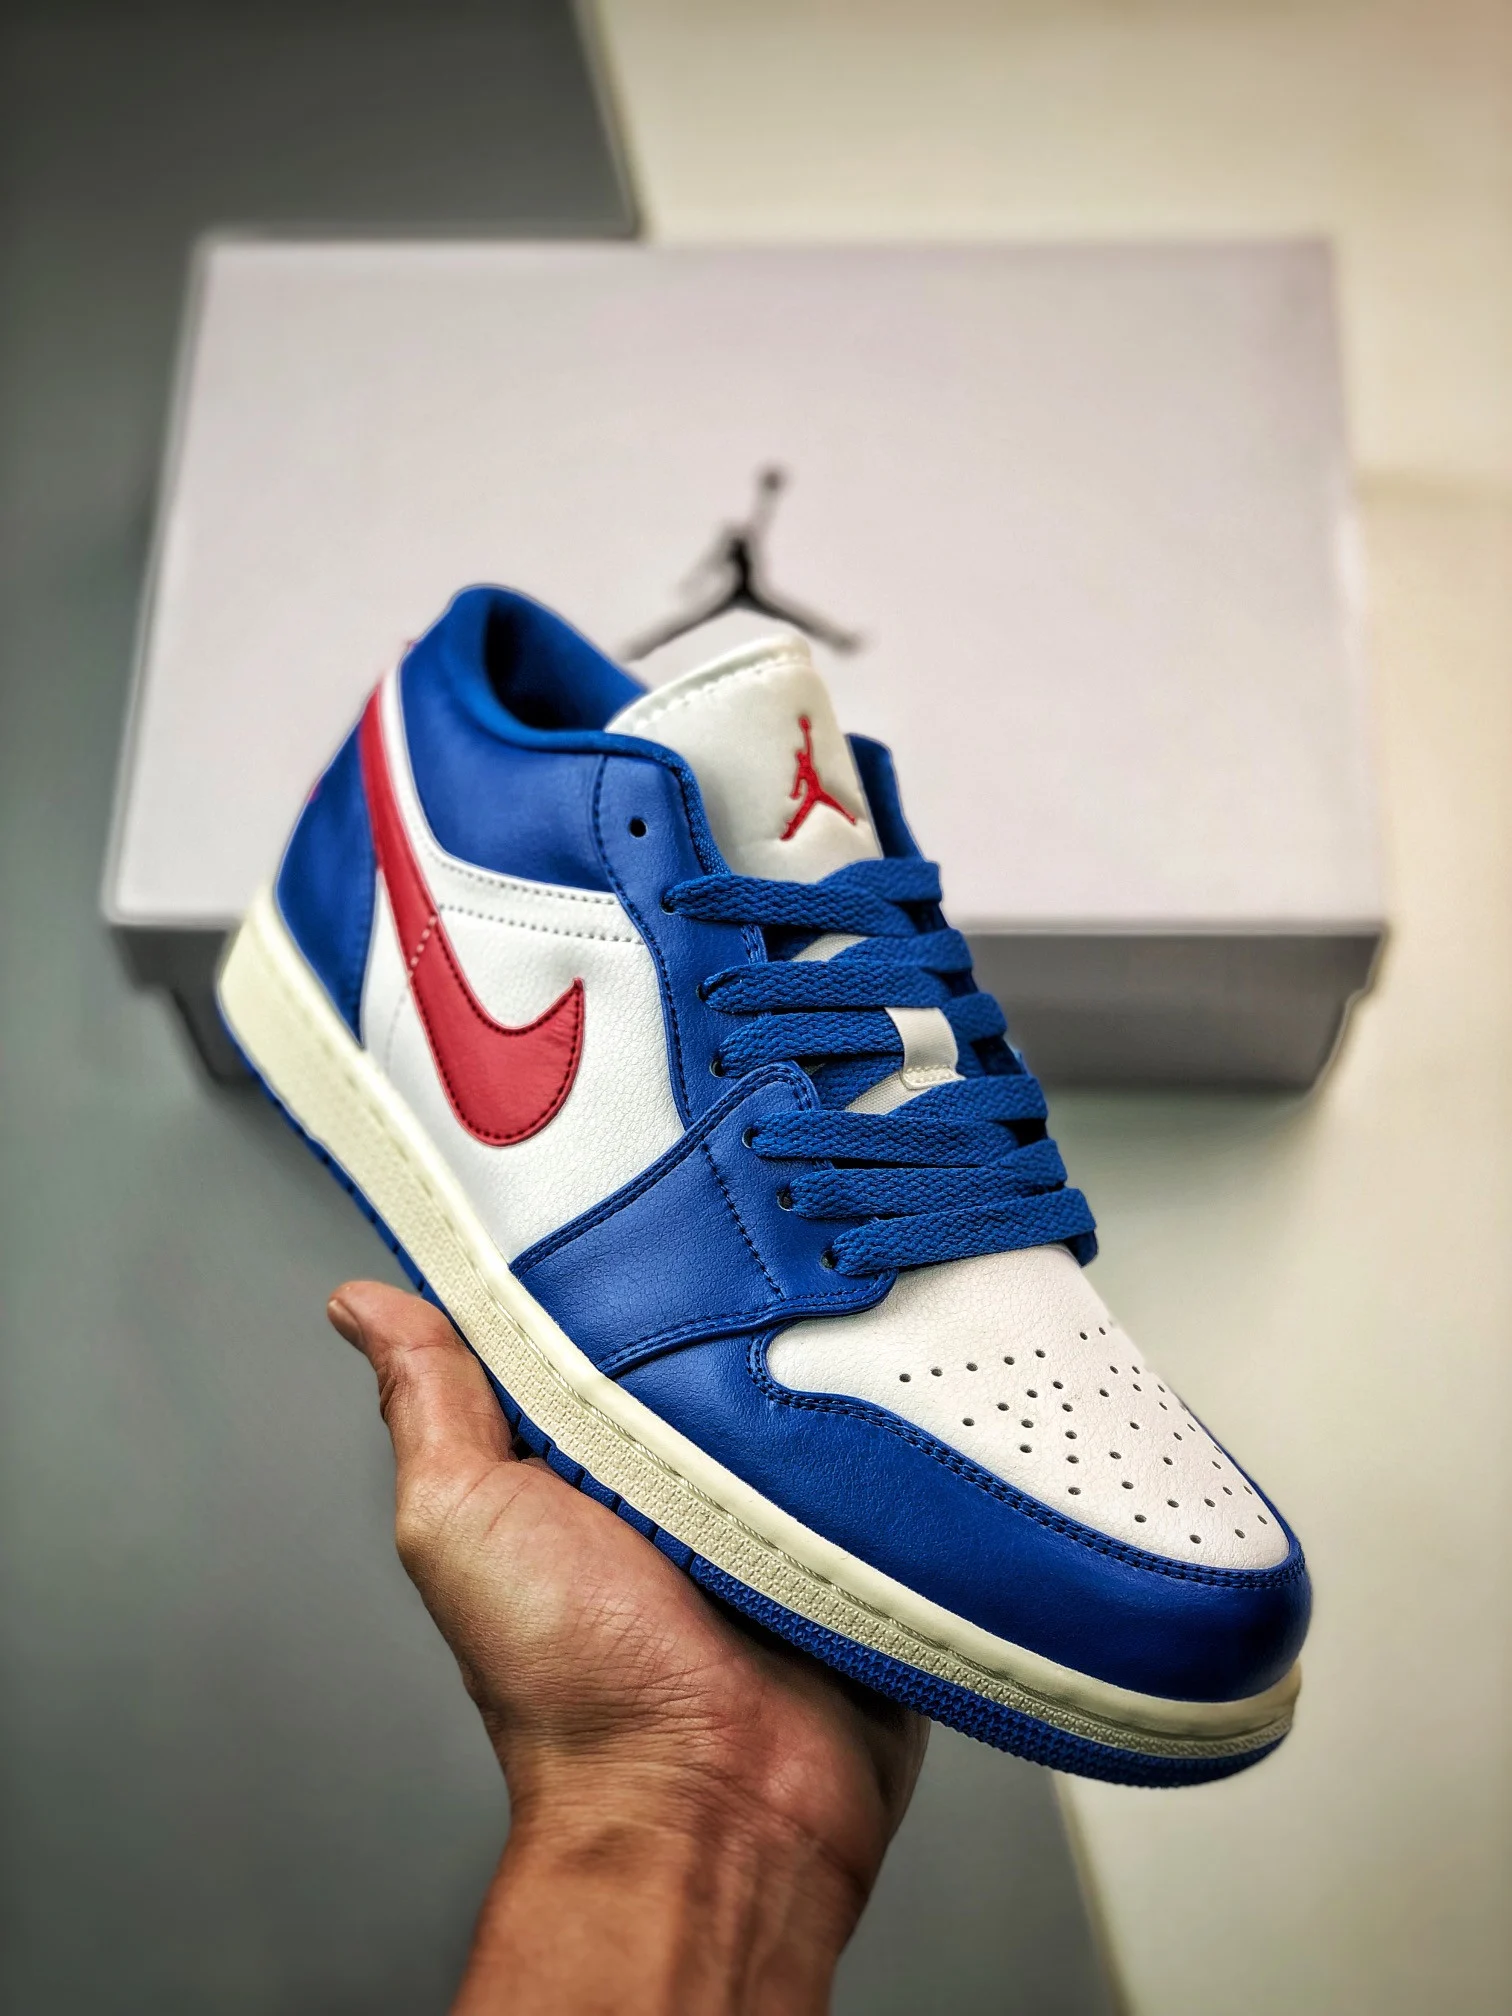 Air Jordan 1 Low Sport Blue Gym Red-White DC0774-416 For Sale